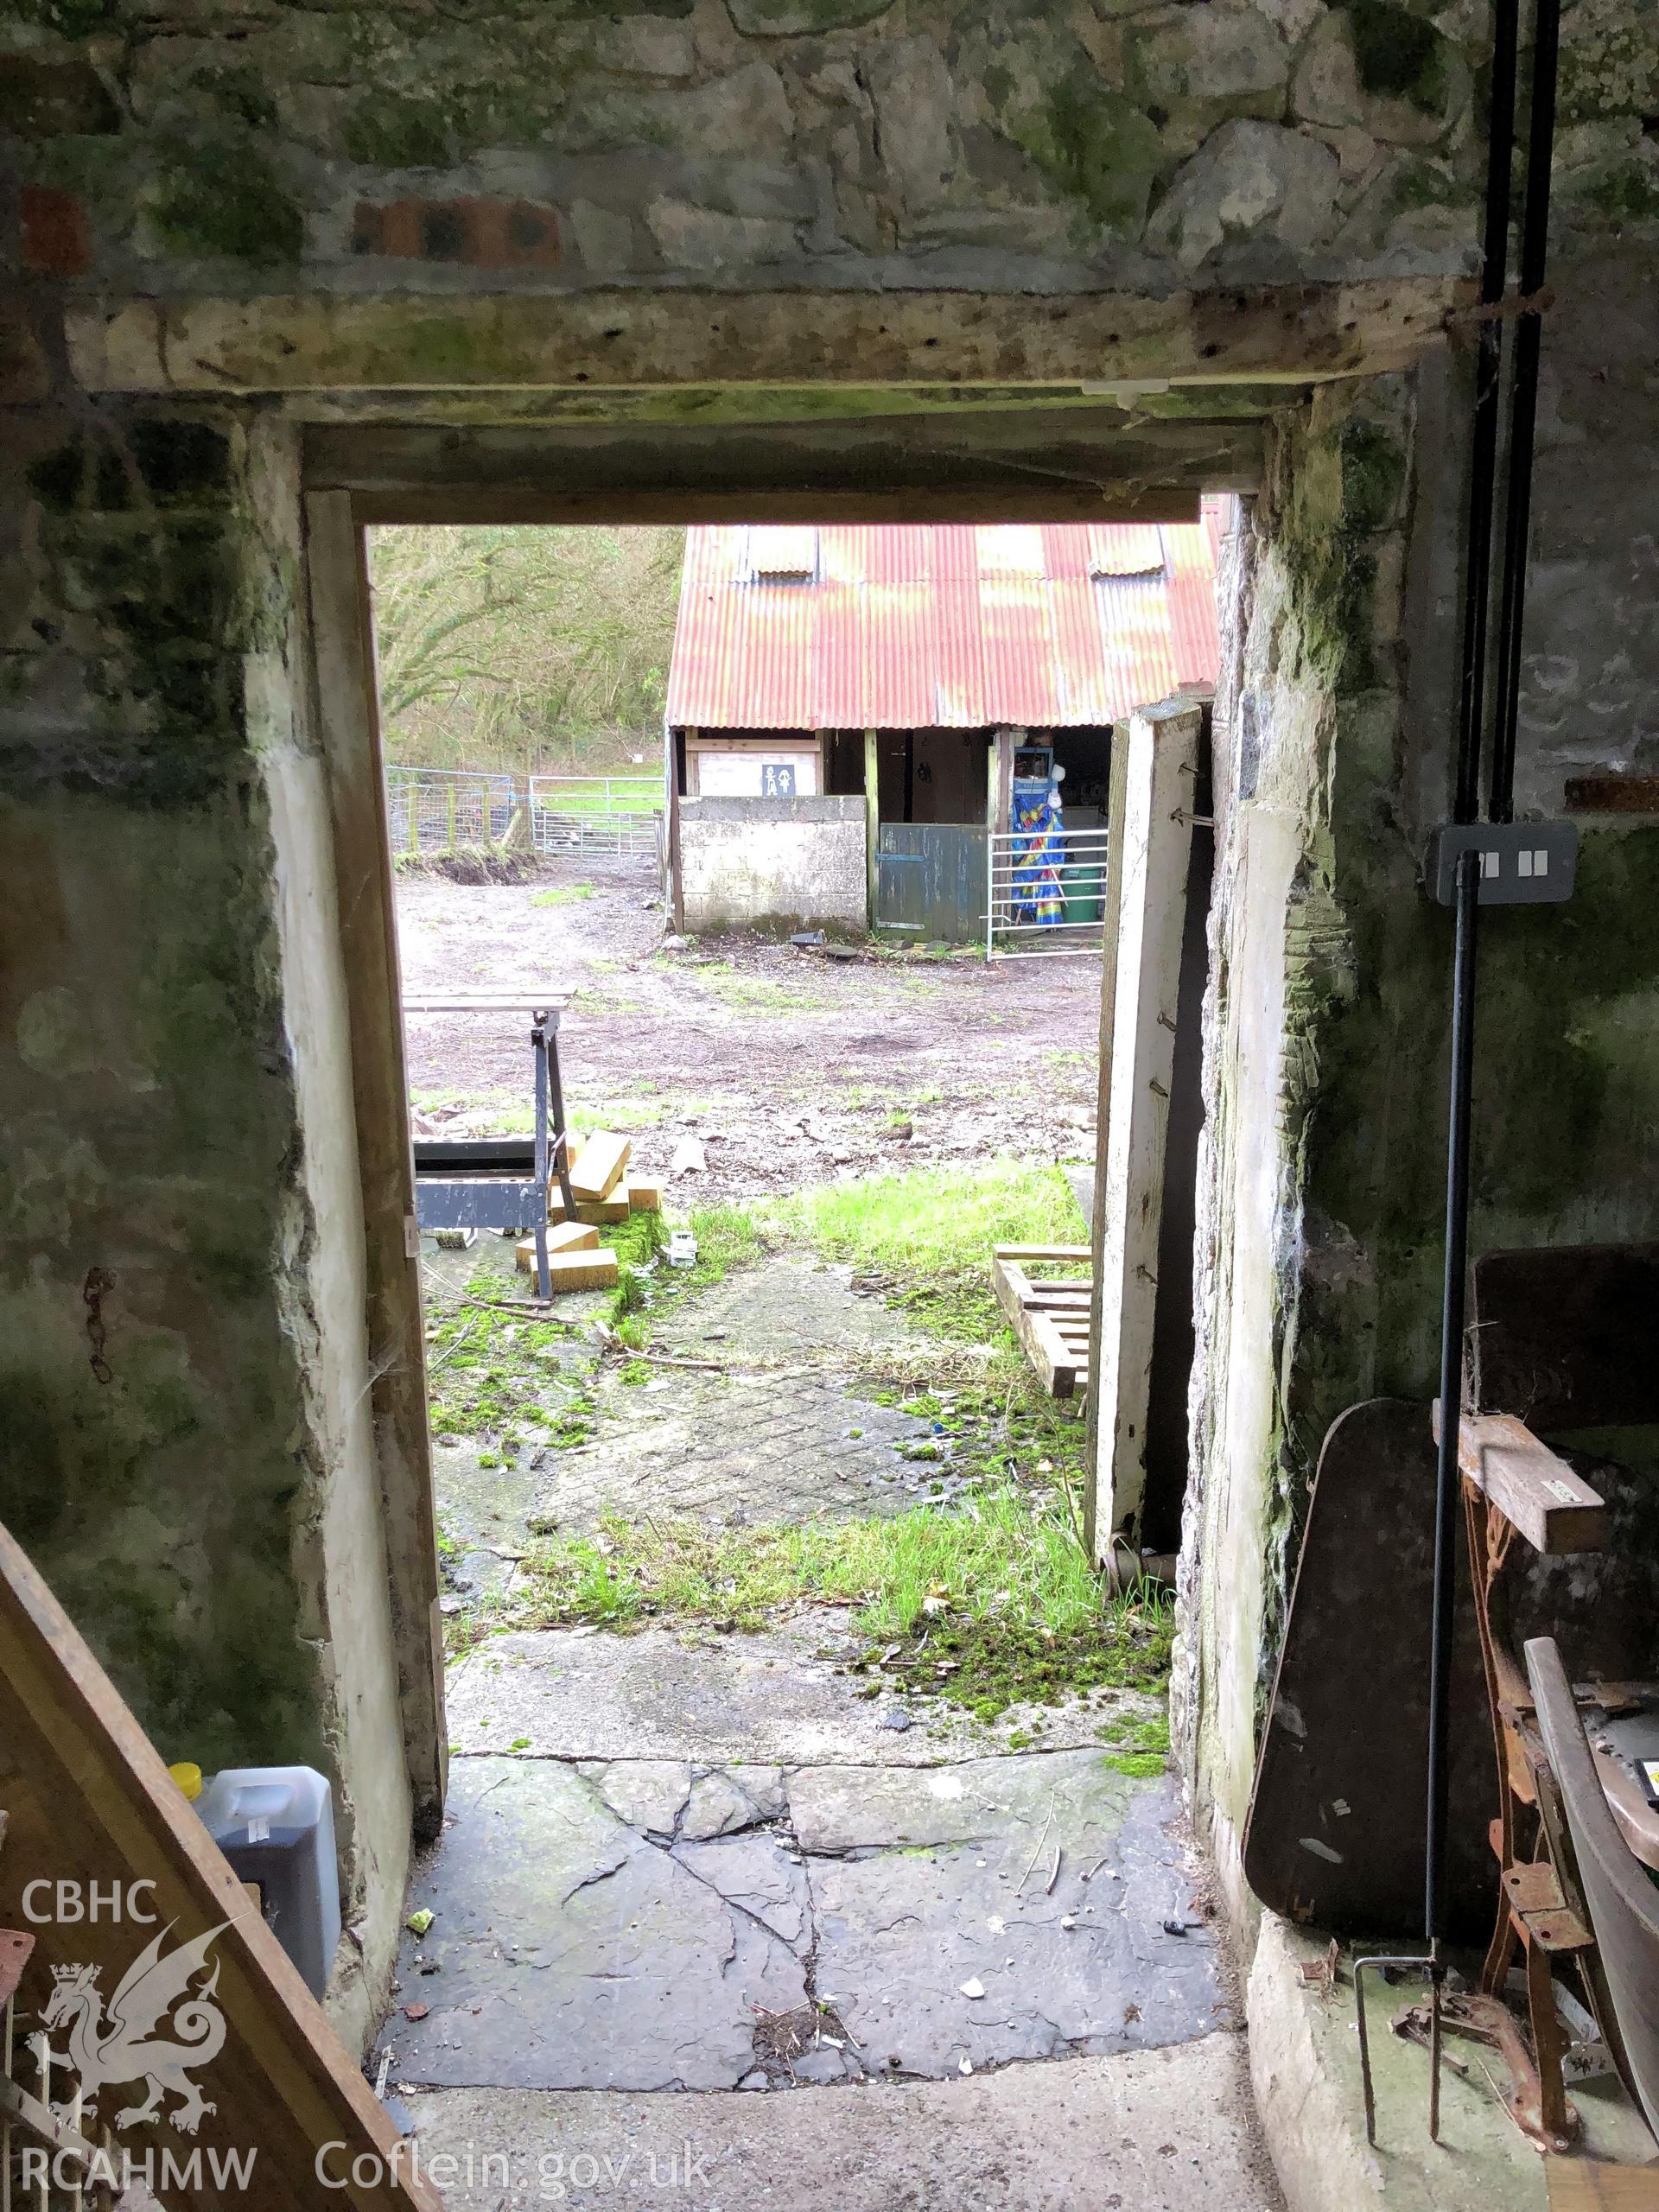 Photograph showing detailed interior view of ale and pail barn's doorway, at Pant-y-Castell, Maesybont, Photographed by Mark Waghorn to meet a condition attached to planning application.